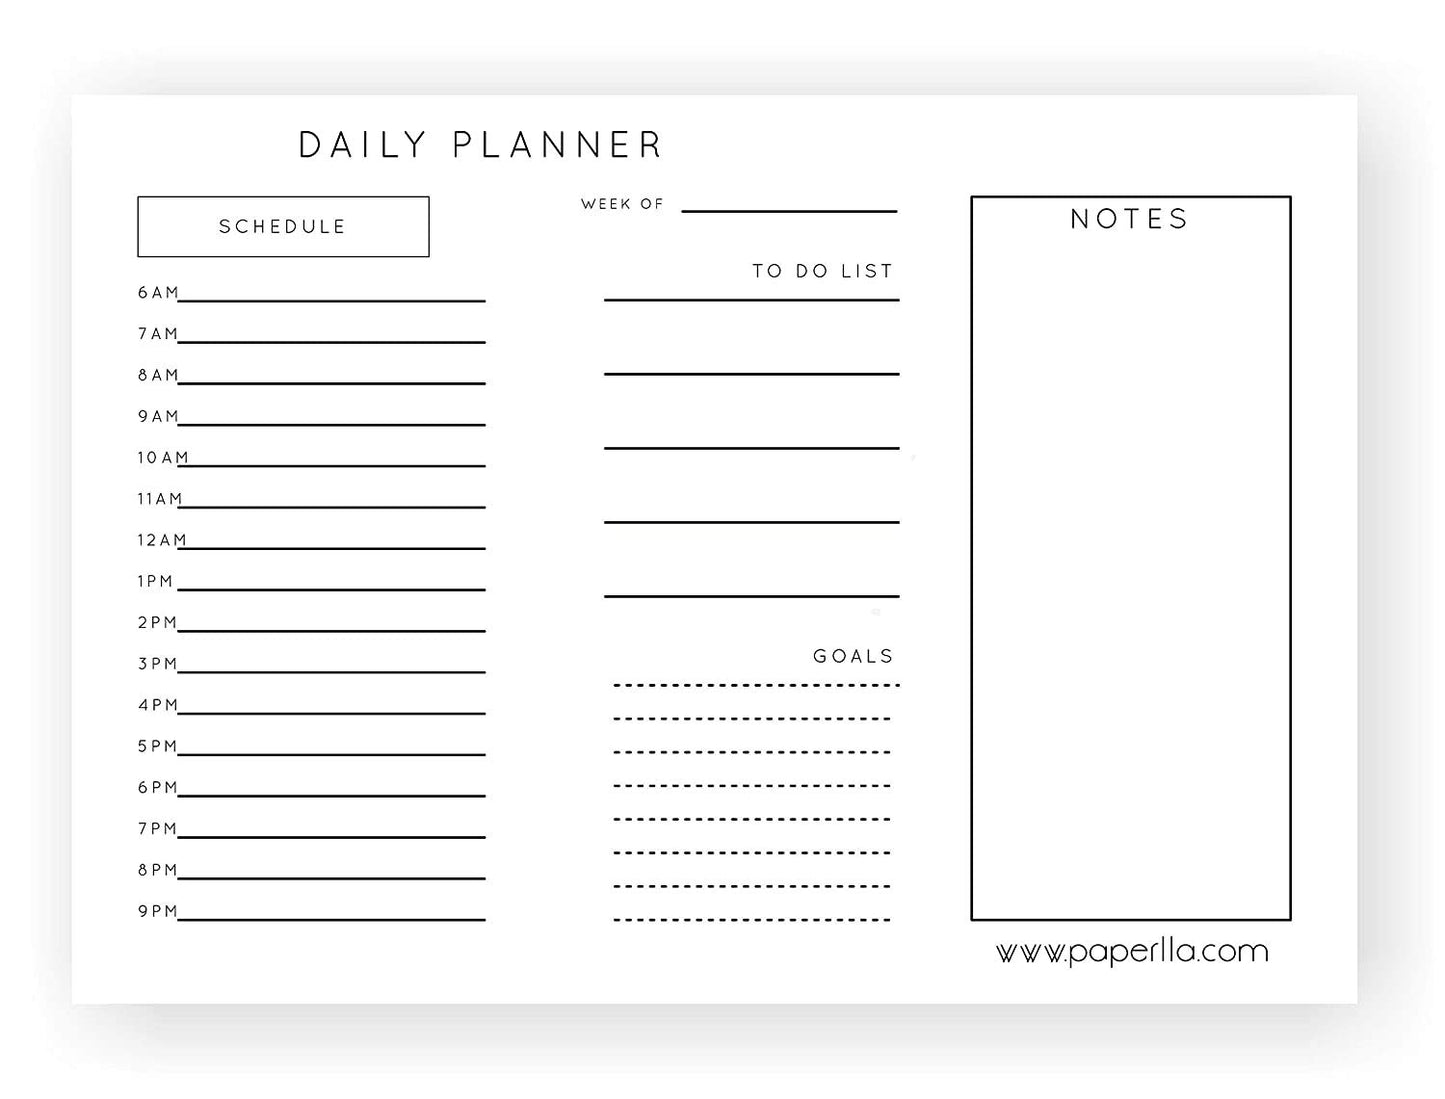 Daily Planner A4 Notepad/Elegant Writing Pad Goal Schedule to Do List Notes Diary Work Home Office Going Men and Women